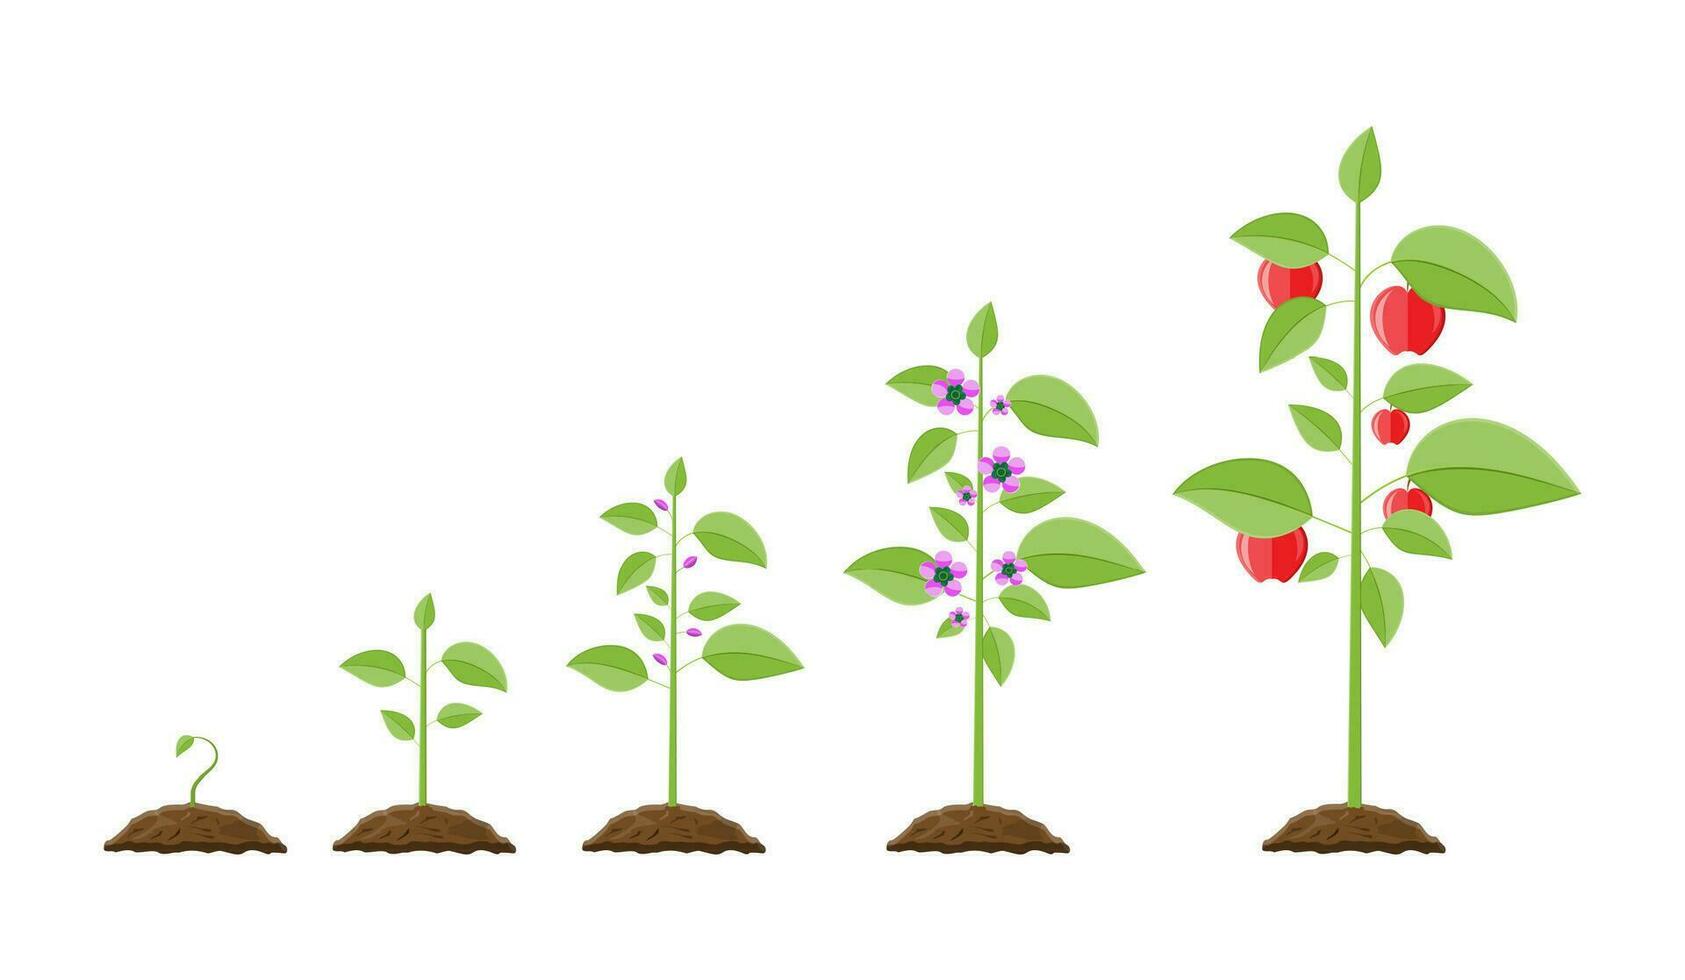 Growth of plant, from sprout to fruit. Planting tree. Seedling gardening plant. Timeline. Vector illustration in flat style